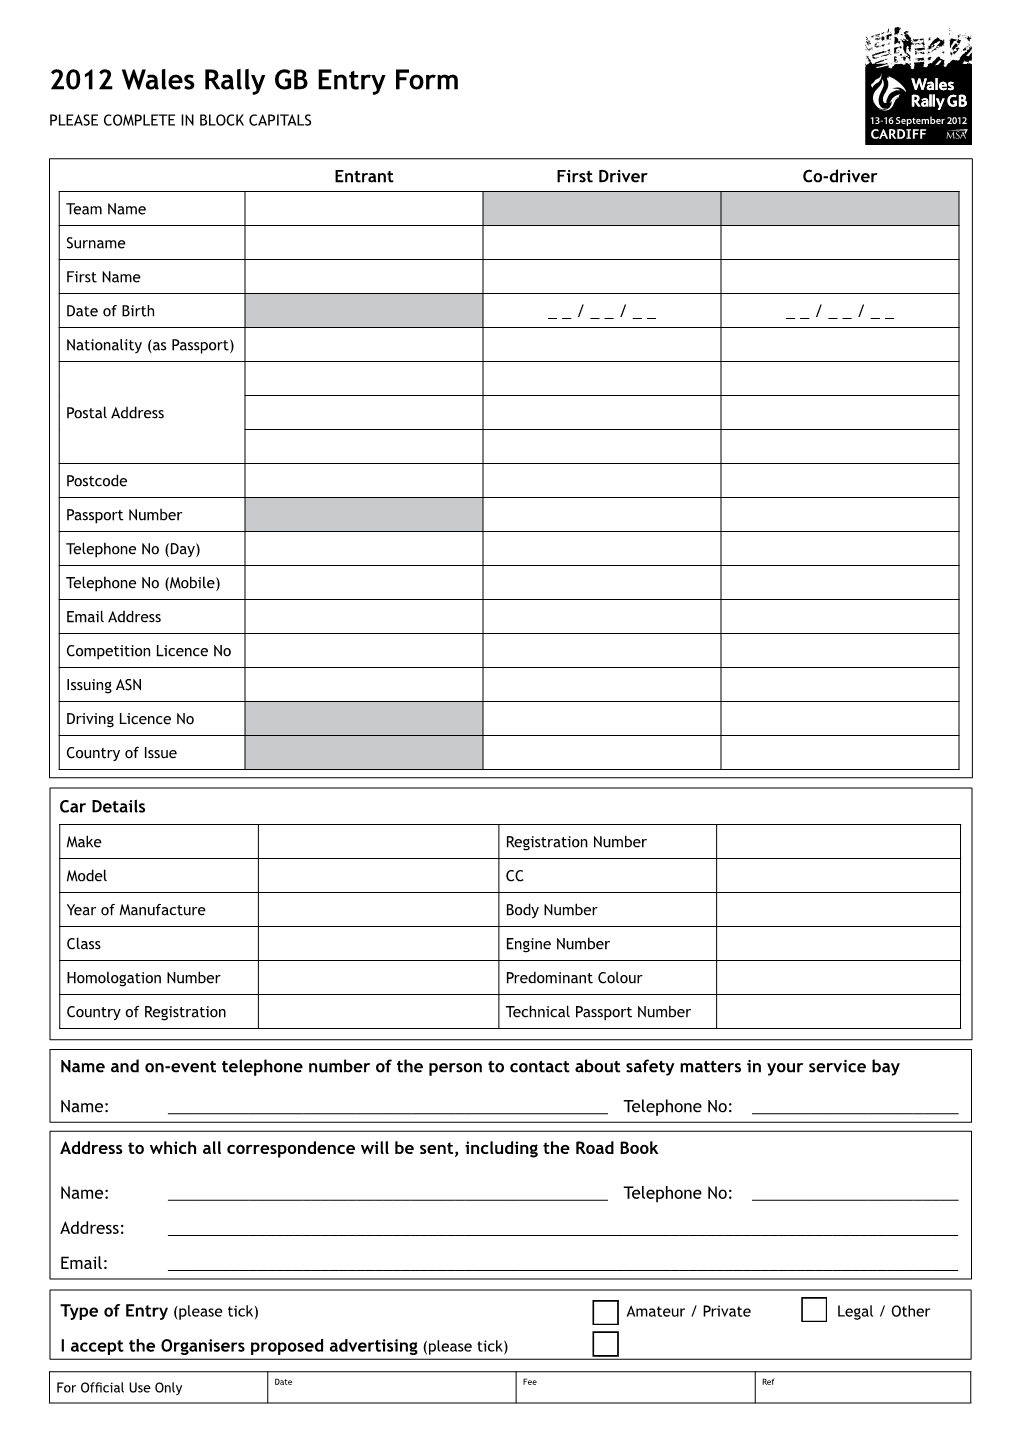 2012 Wales Rally GB Entry Form